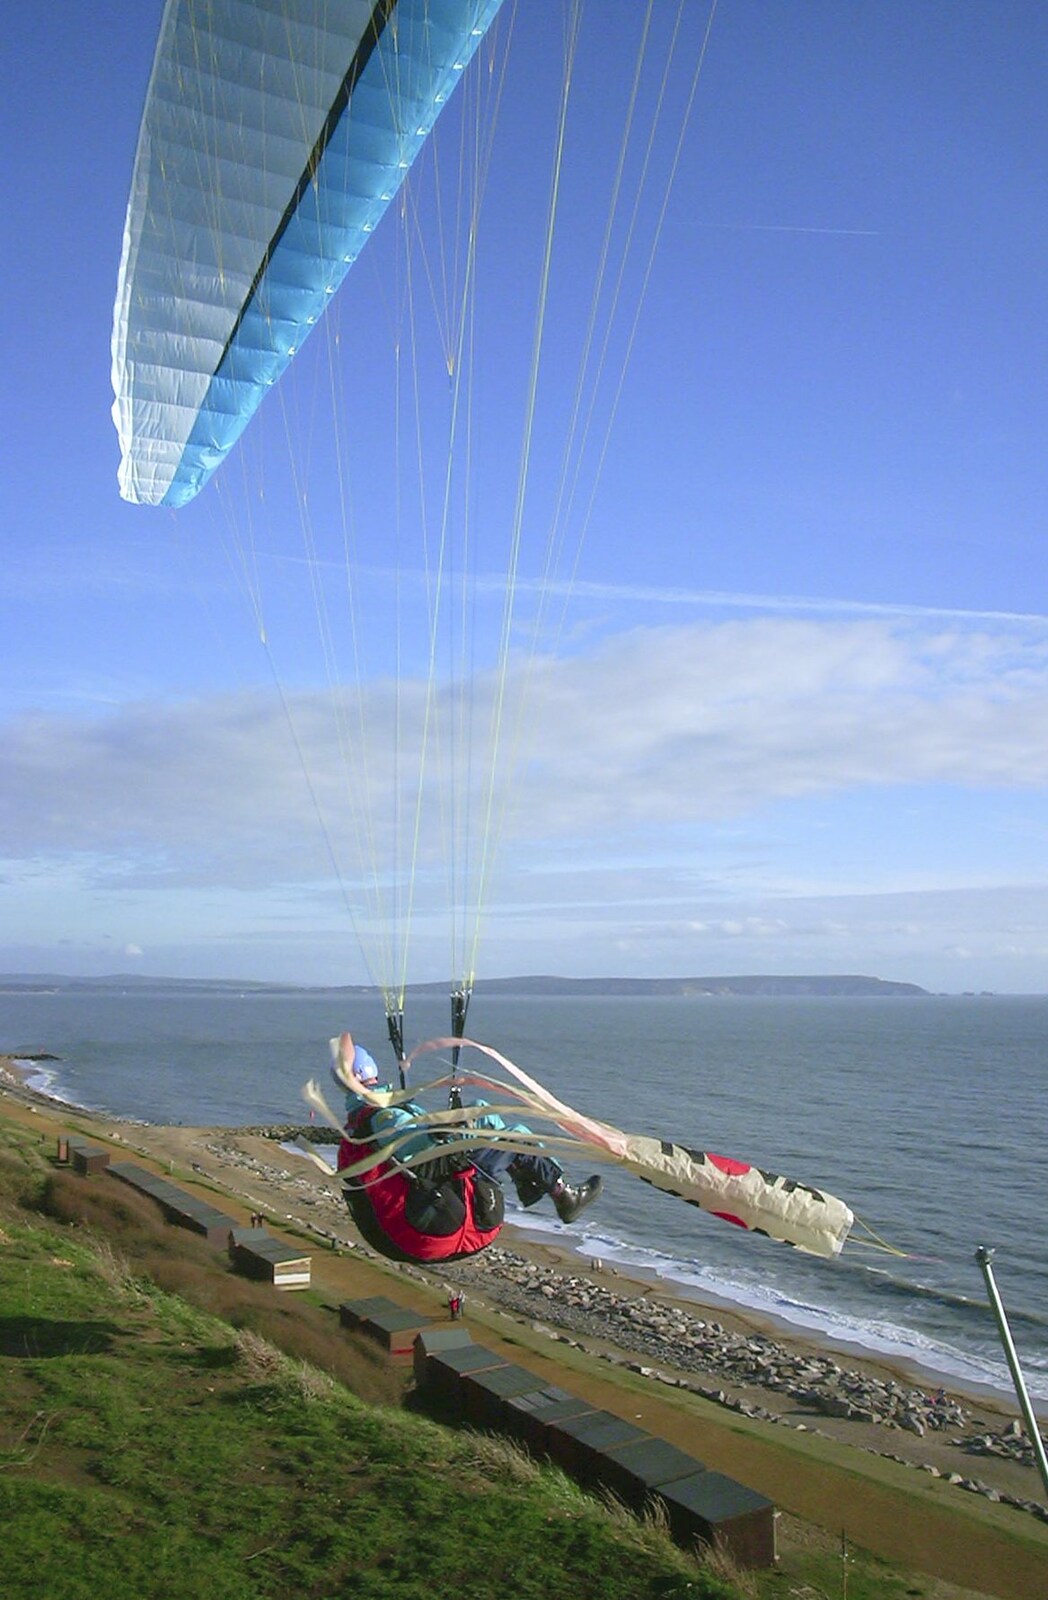 The para-glider sets sail towards the sea from A Trip Down South, New Milton, Hampshire - 25th August 2001